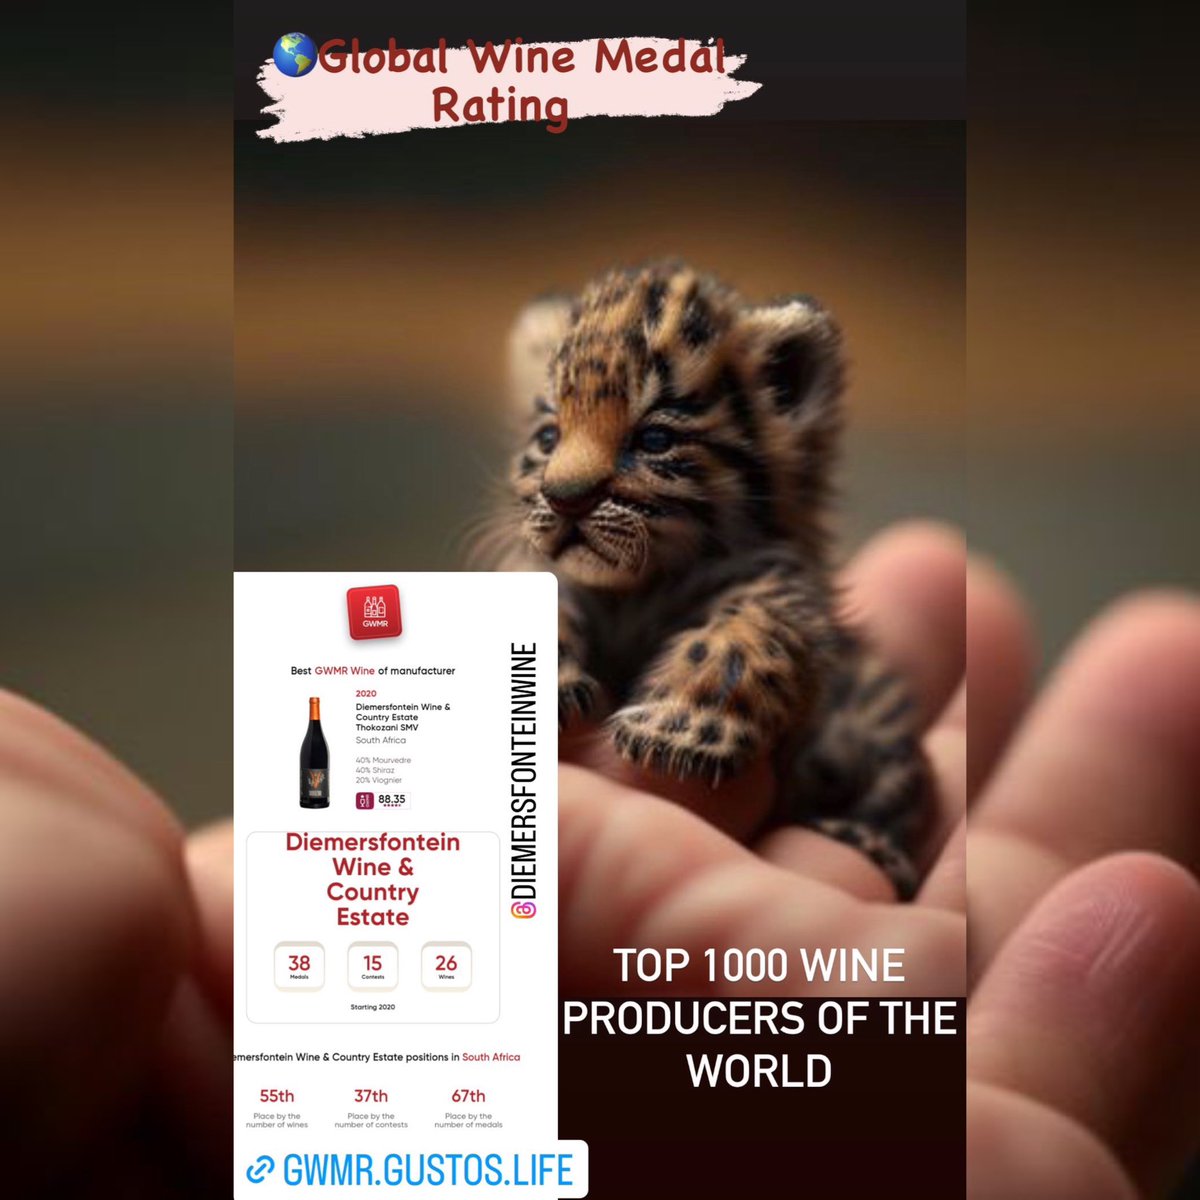 🥇🥈🥉
⠀
@Diemersfontein Medal Profile!
⠀
Visit
🌎#GlobalWineMedal Rating
now and uncover 👽 the top-awarded #wines!
⠀
#winebusiness #winecompetition
#winetech #AI #redwine #whitewine #champagne #SaveSAwine #heartwellington #Malbec #CheninBlanc #Rose #Merlot #winespecials